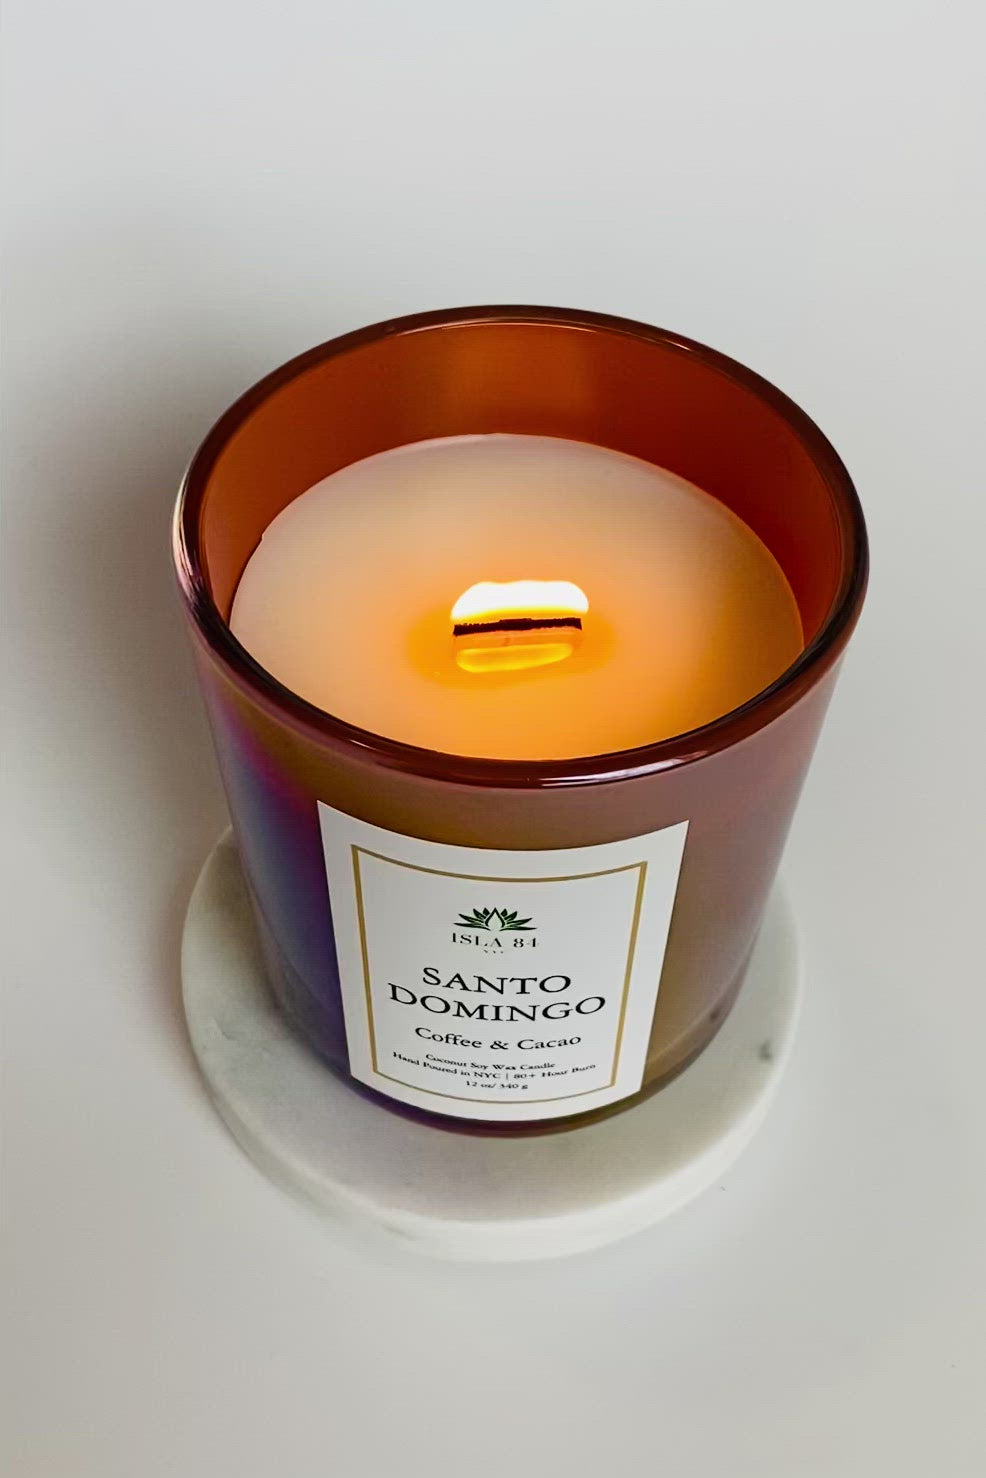 Santo Domingo Scented Candle; Saint Sunday; Dominican Republic Candles; DR Candles; Quisqueya Candles; Velas aromaticas; Coconut Soy Wax Candles; Iridescent Brown Vessel with White label and green logo; burning wood wick